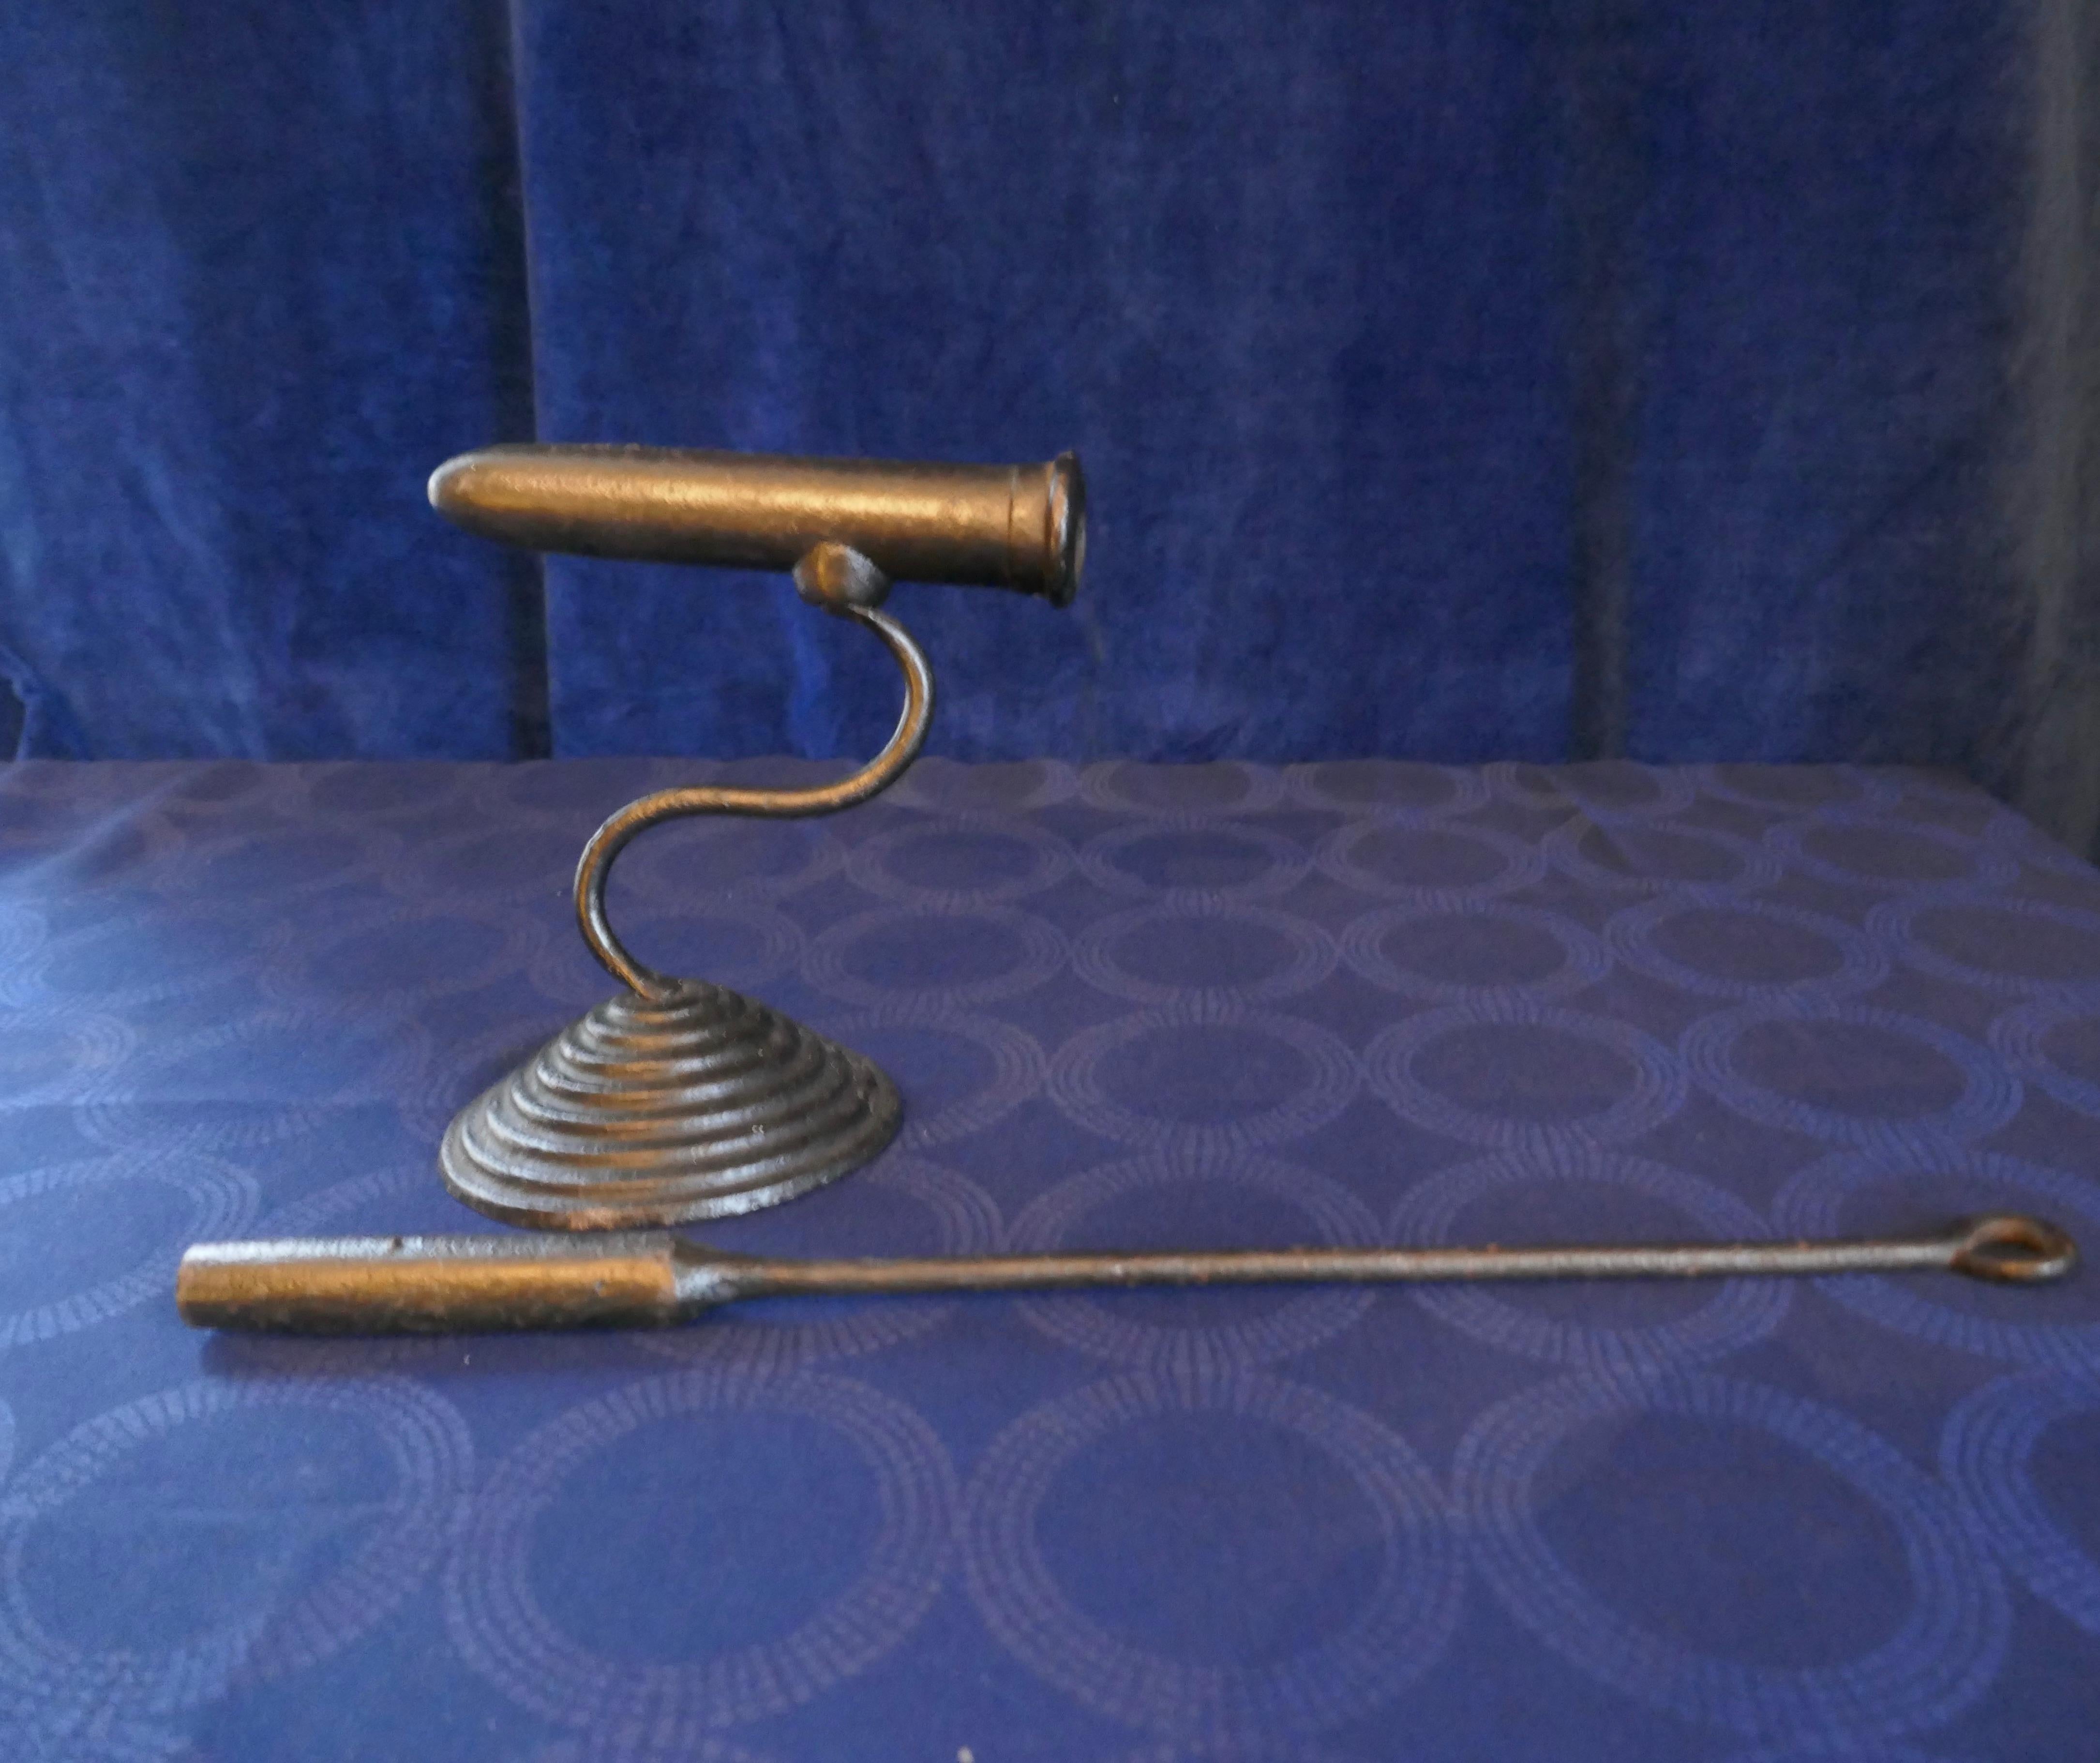 19th century goffering flat iron (or tally iron) complete with heating poker

Introduced in the 17th century an iron like this is used to make the frills and pleats in linen and other fabrics
The iron was heated with a long cylindrical poker